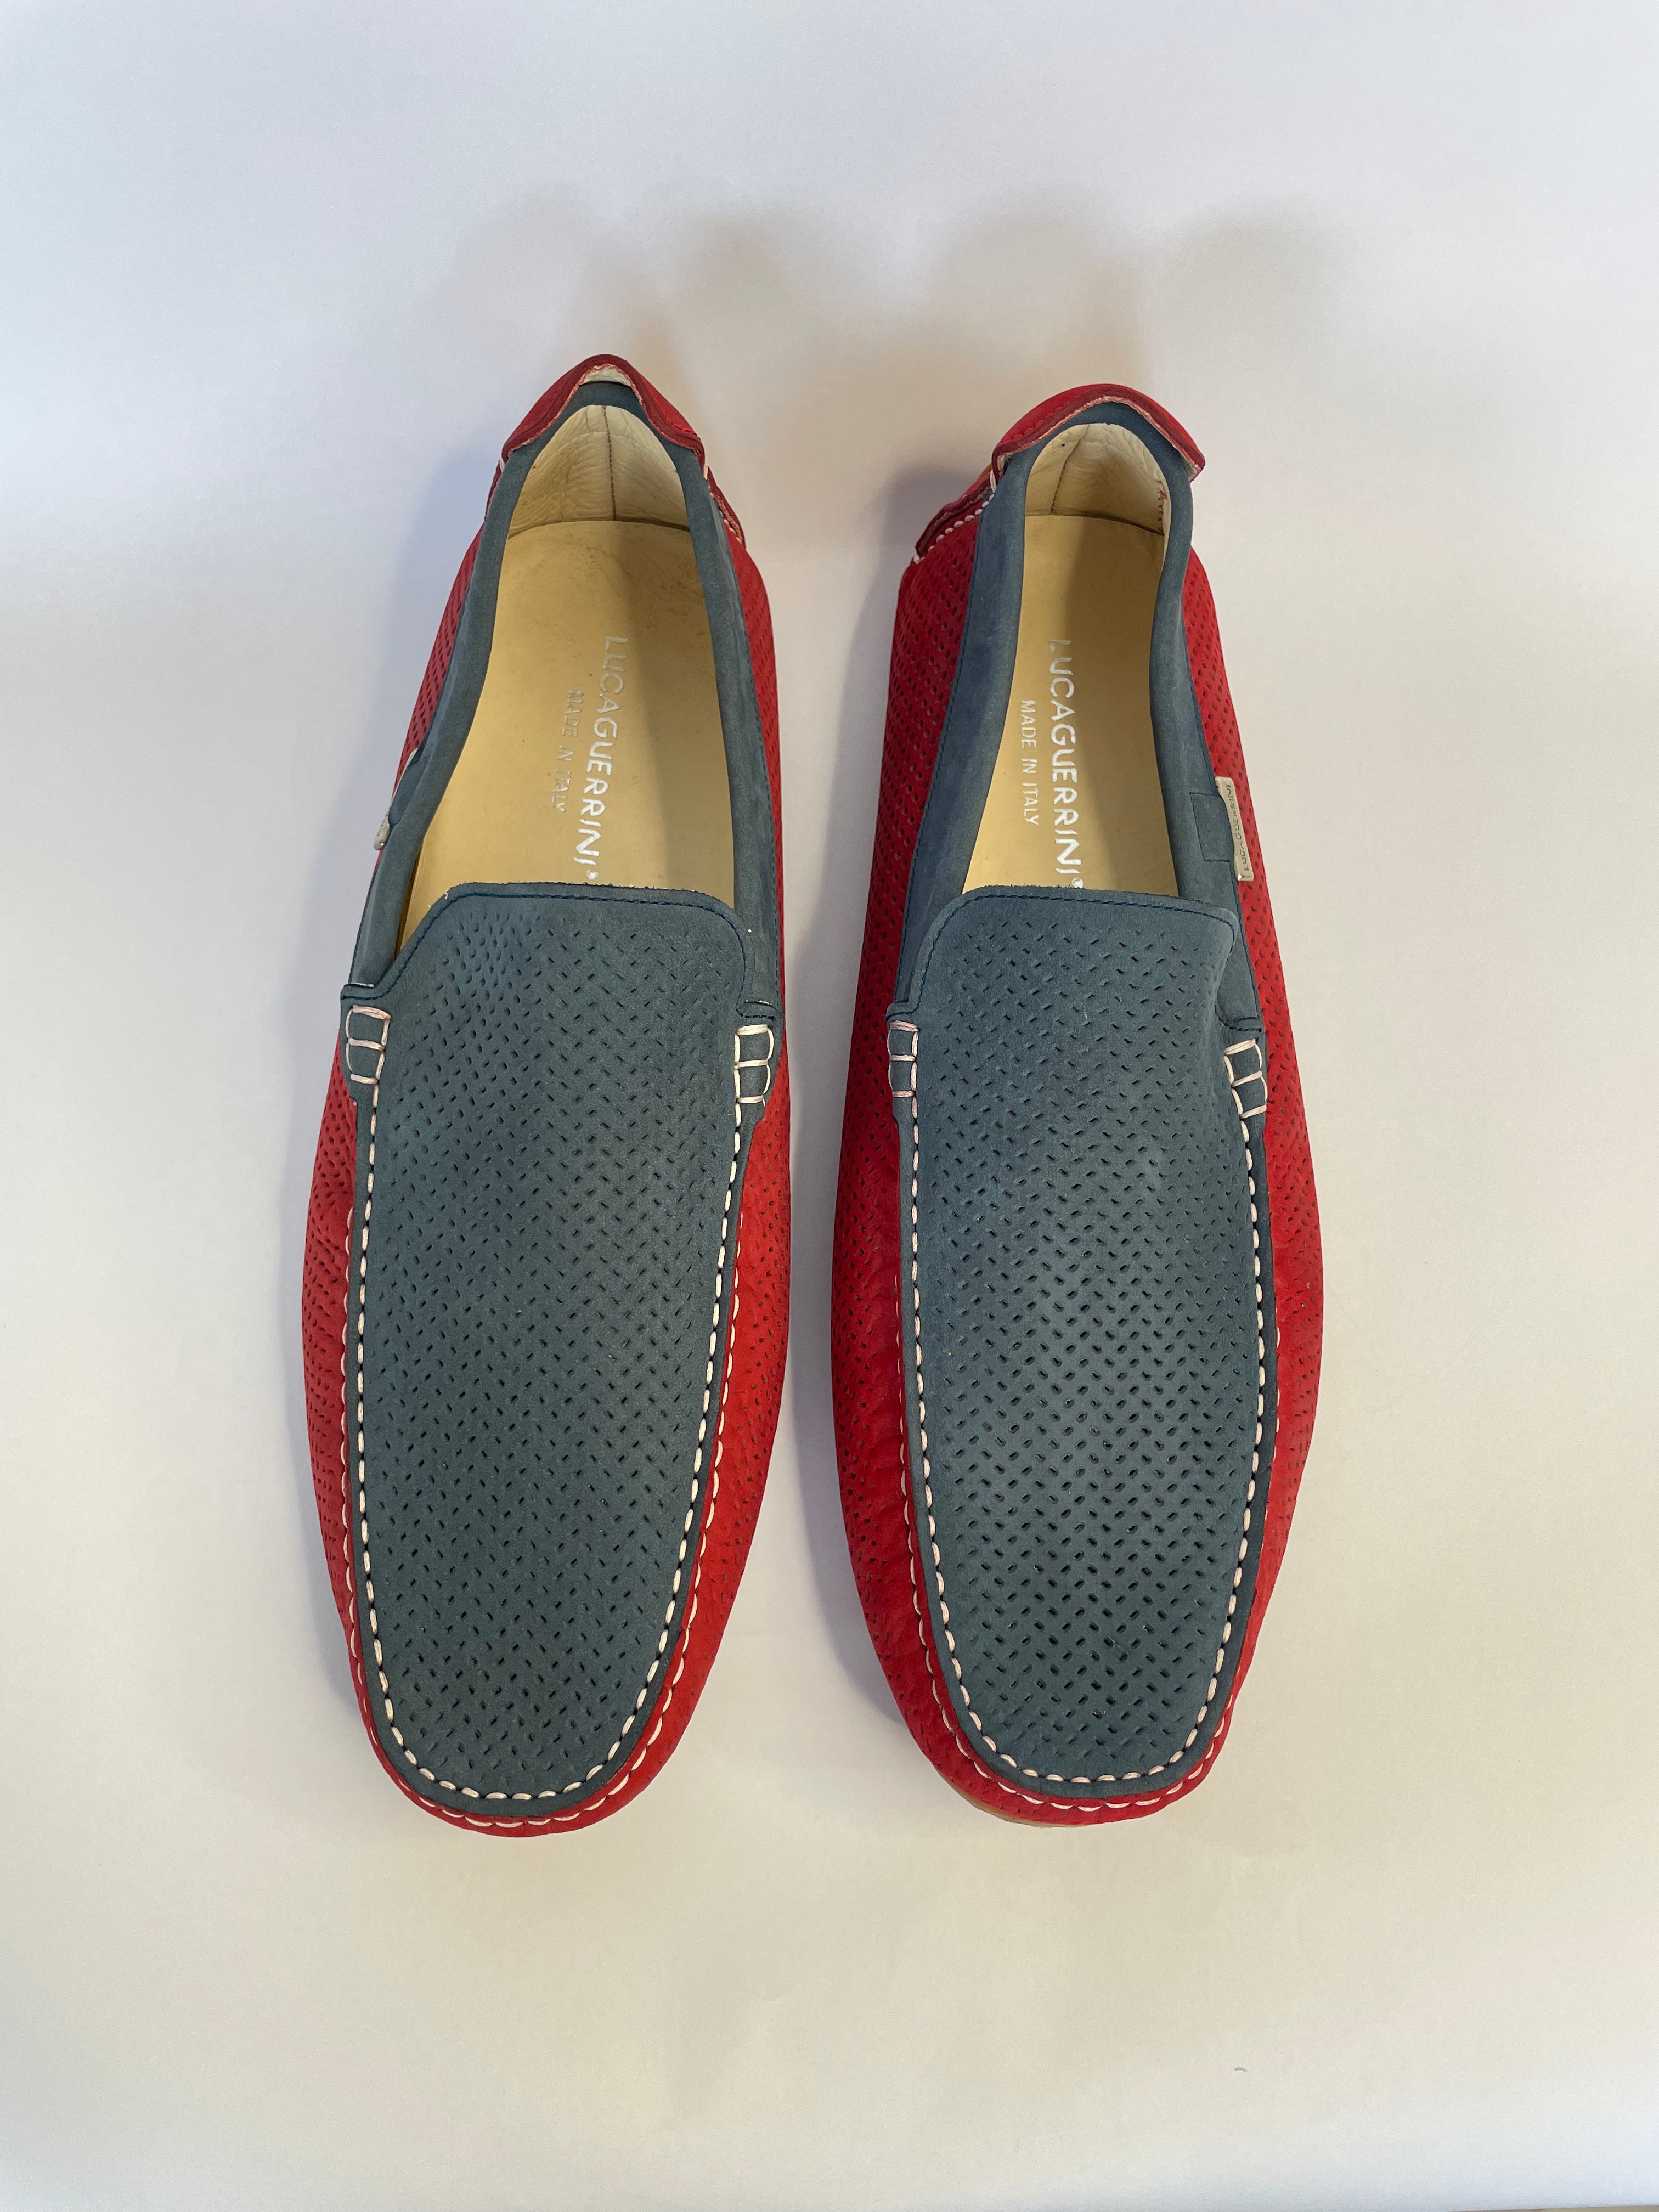 Luca Guerrini Red & Blue Loafers